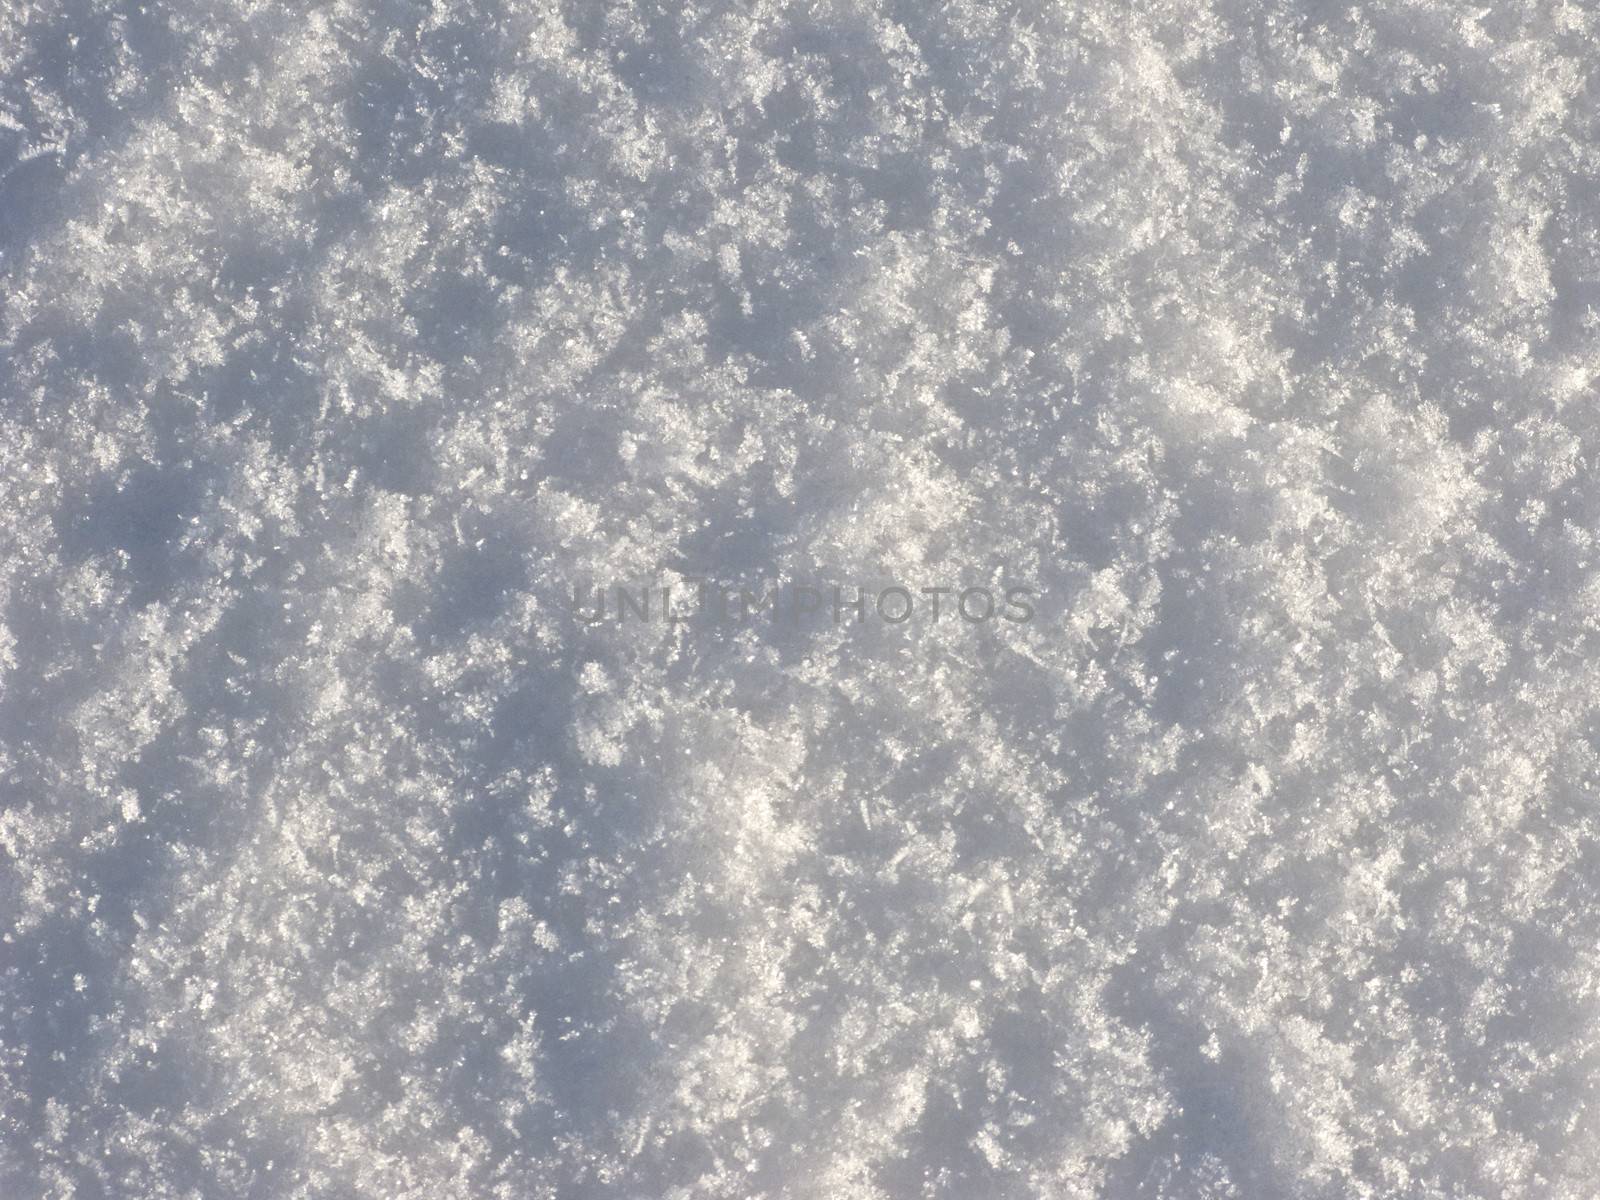 Crystal snow surface background by wander